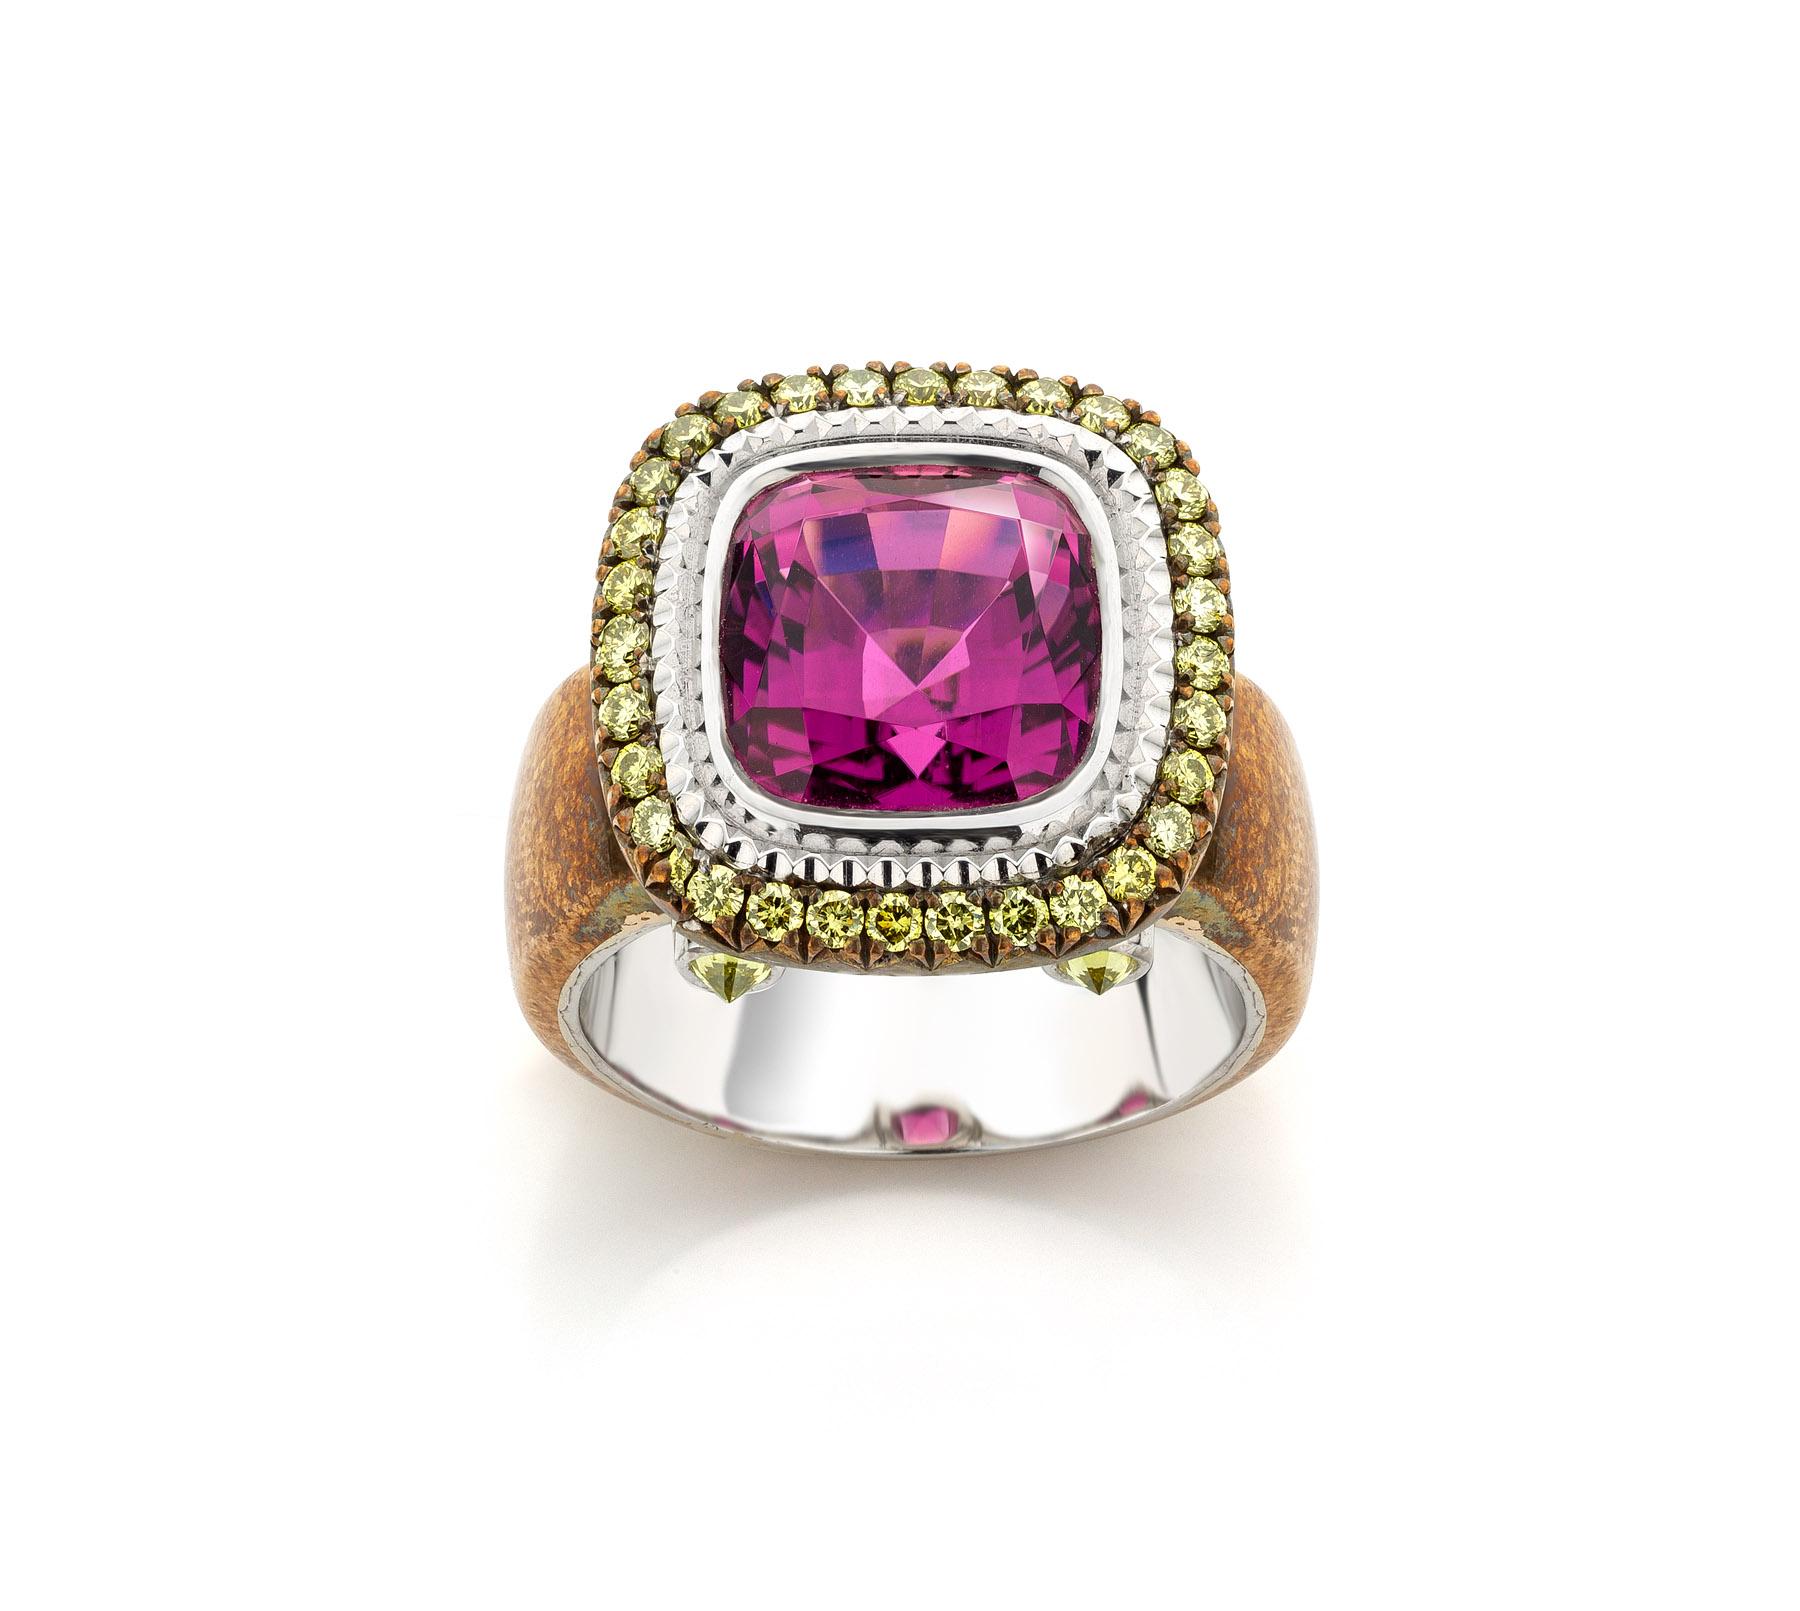 Contemporary 18K White Gold & Bronze 4.2 Carat Pink Tourmaline Cocktail Ring by Jochen Leën For Sale